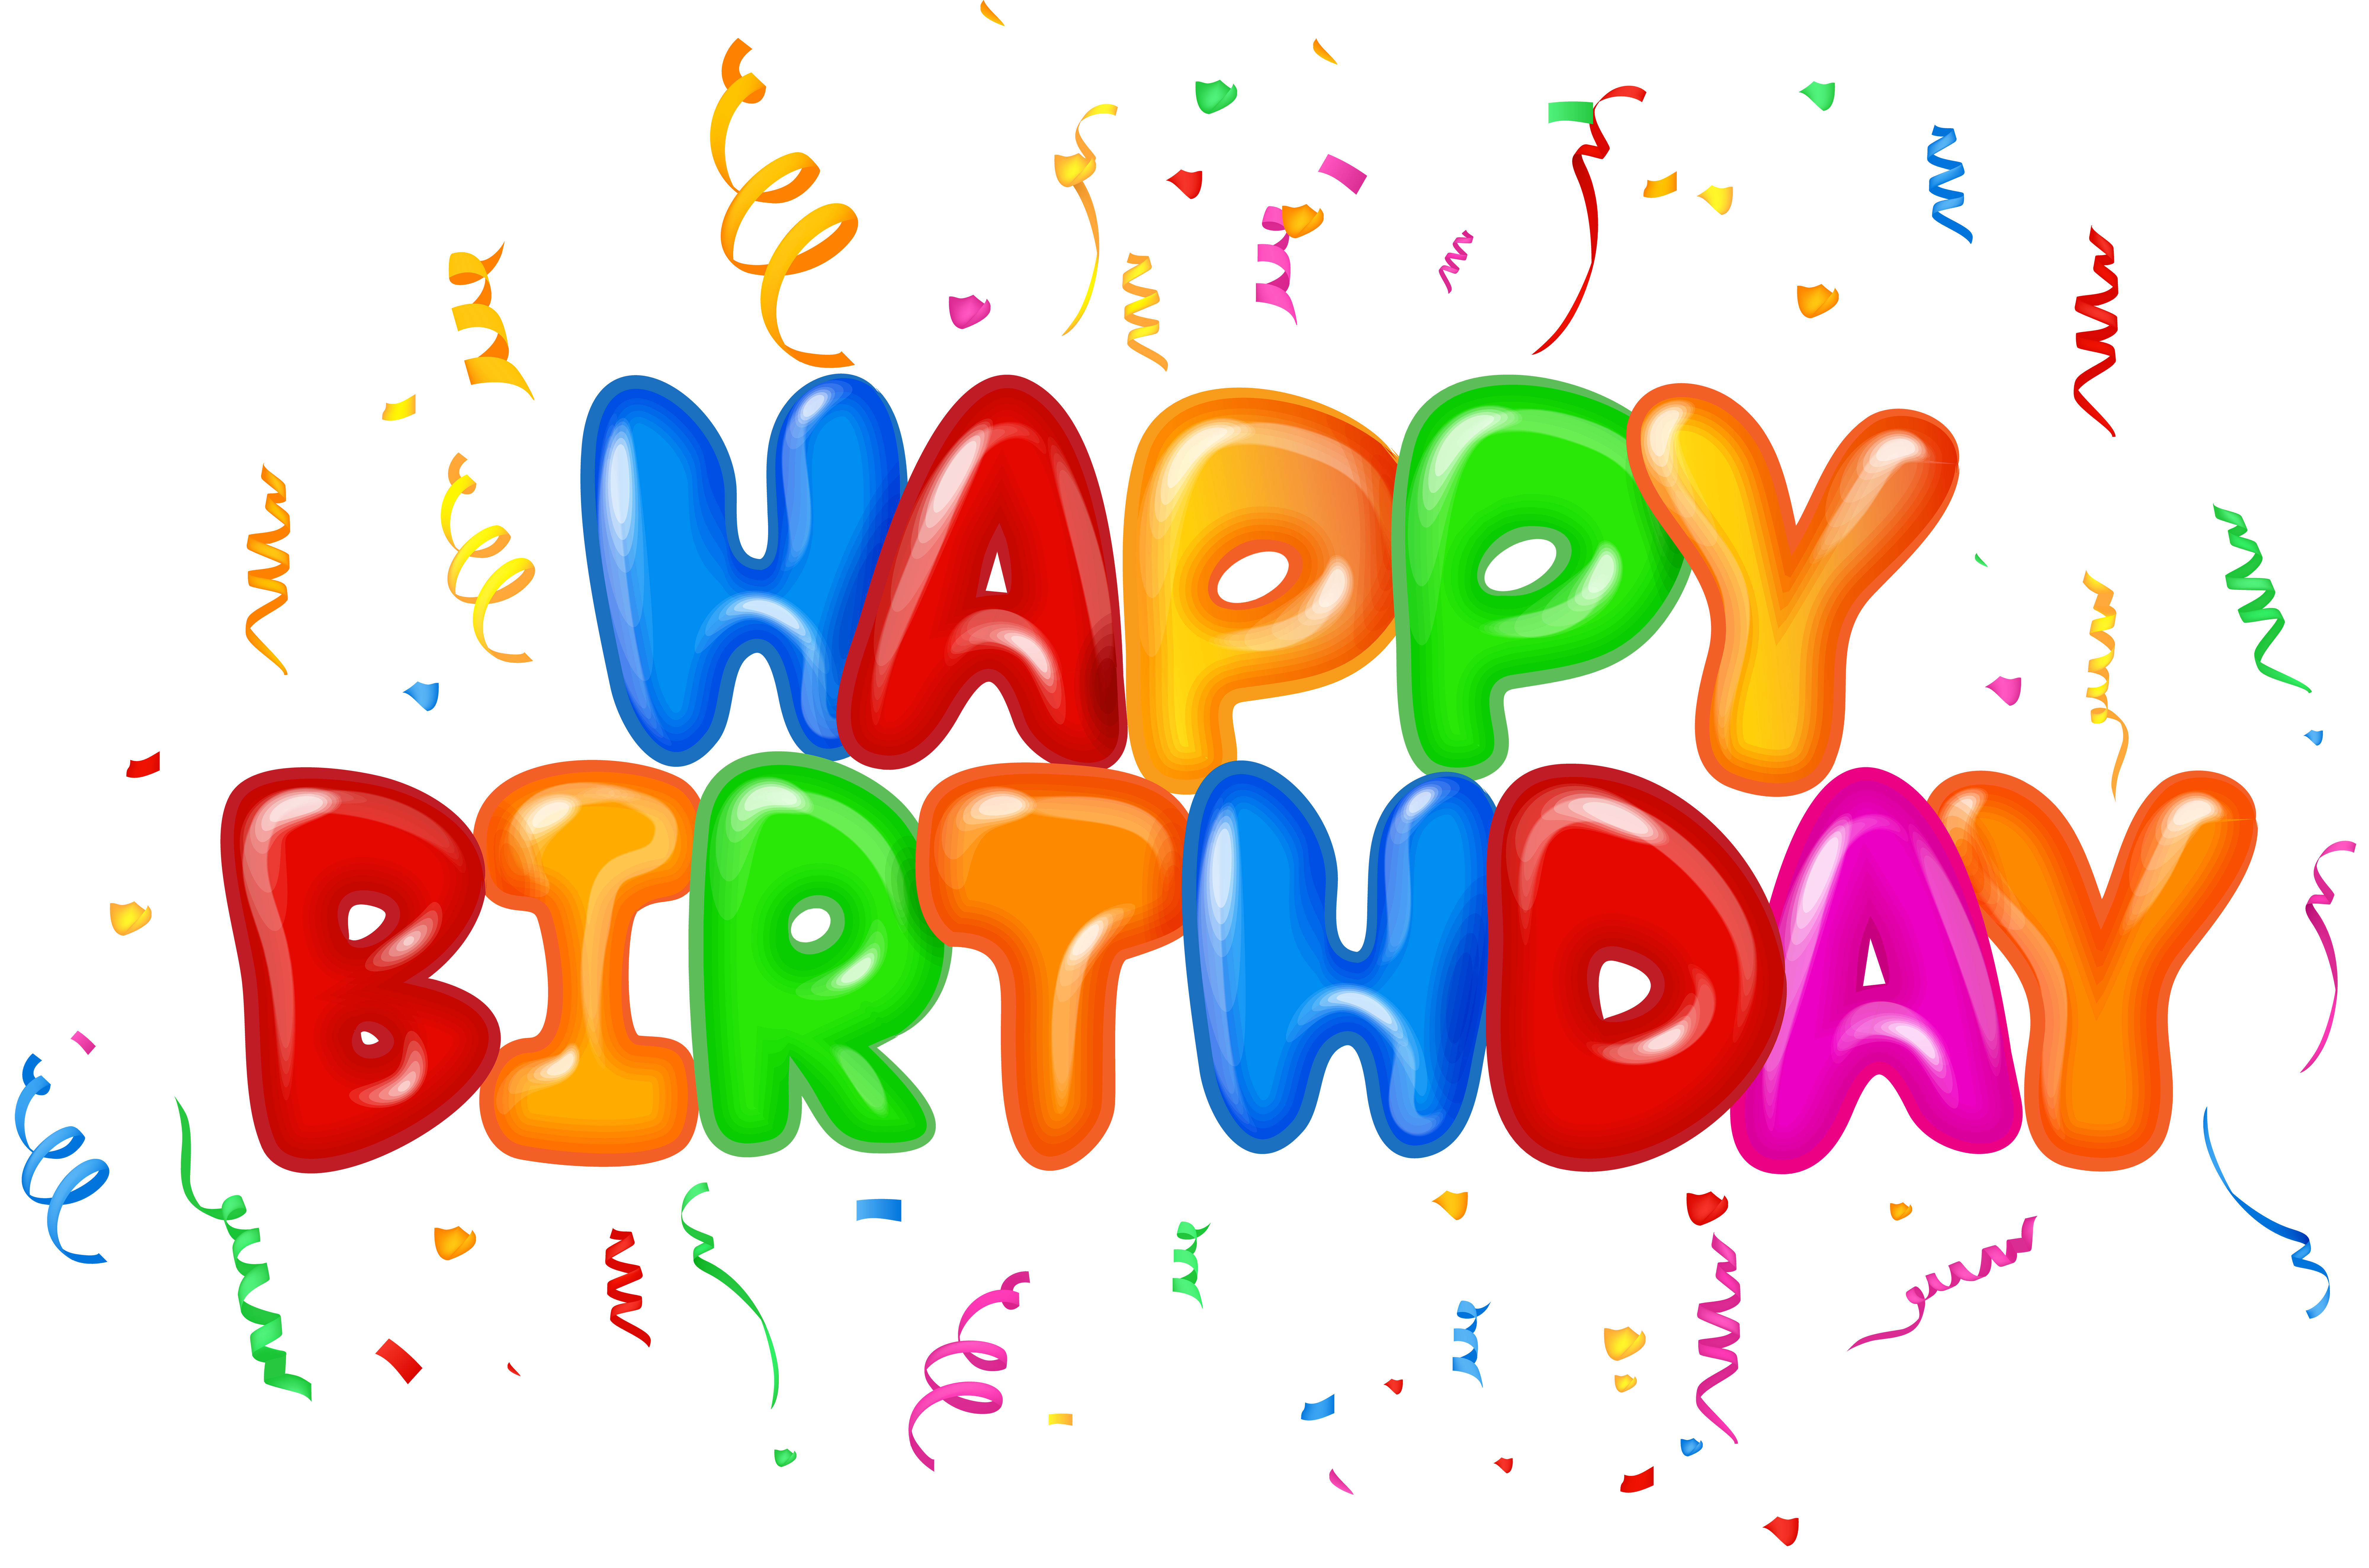 Happy Birthday Text Decor Png Clip Art Image Gallery Yopriceville High Quality Images And Transparent Png Free Clipart